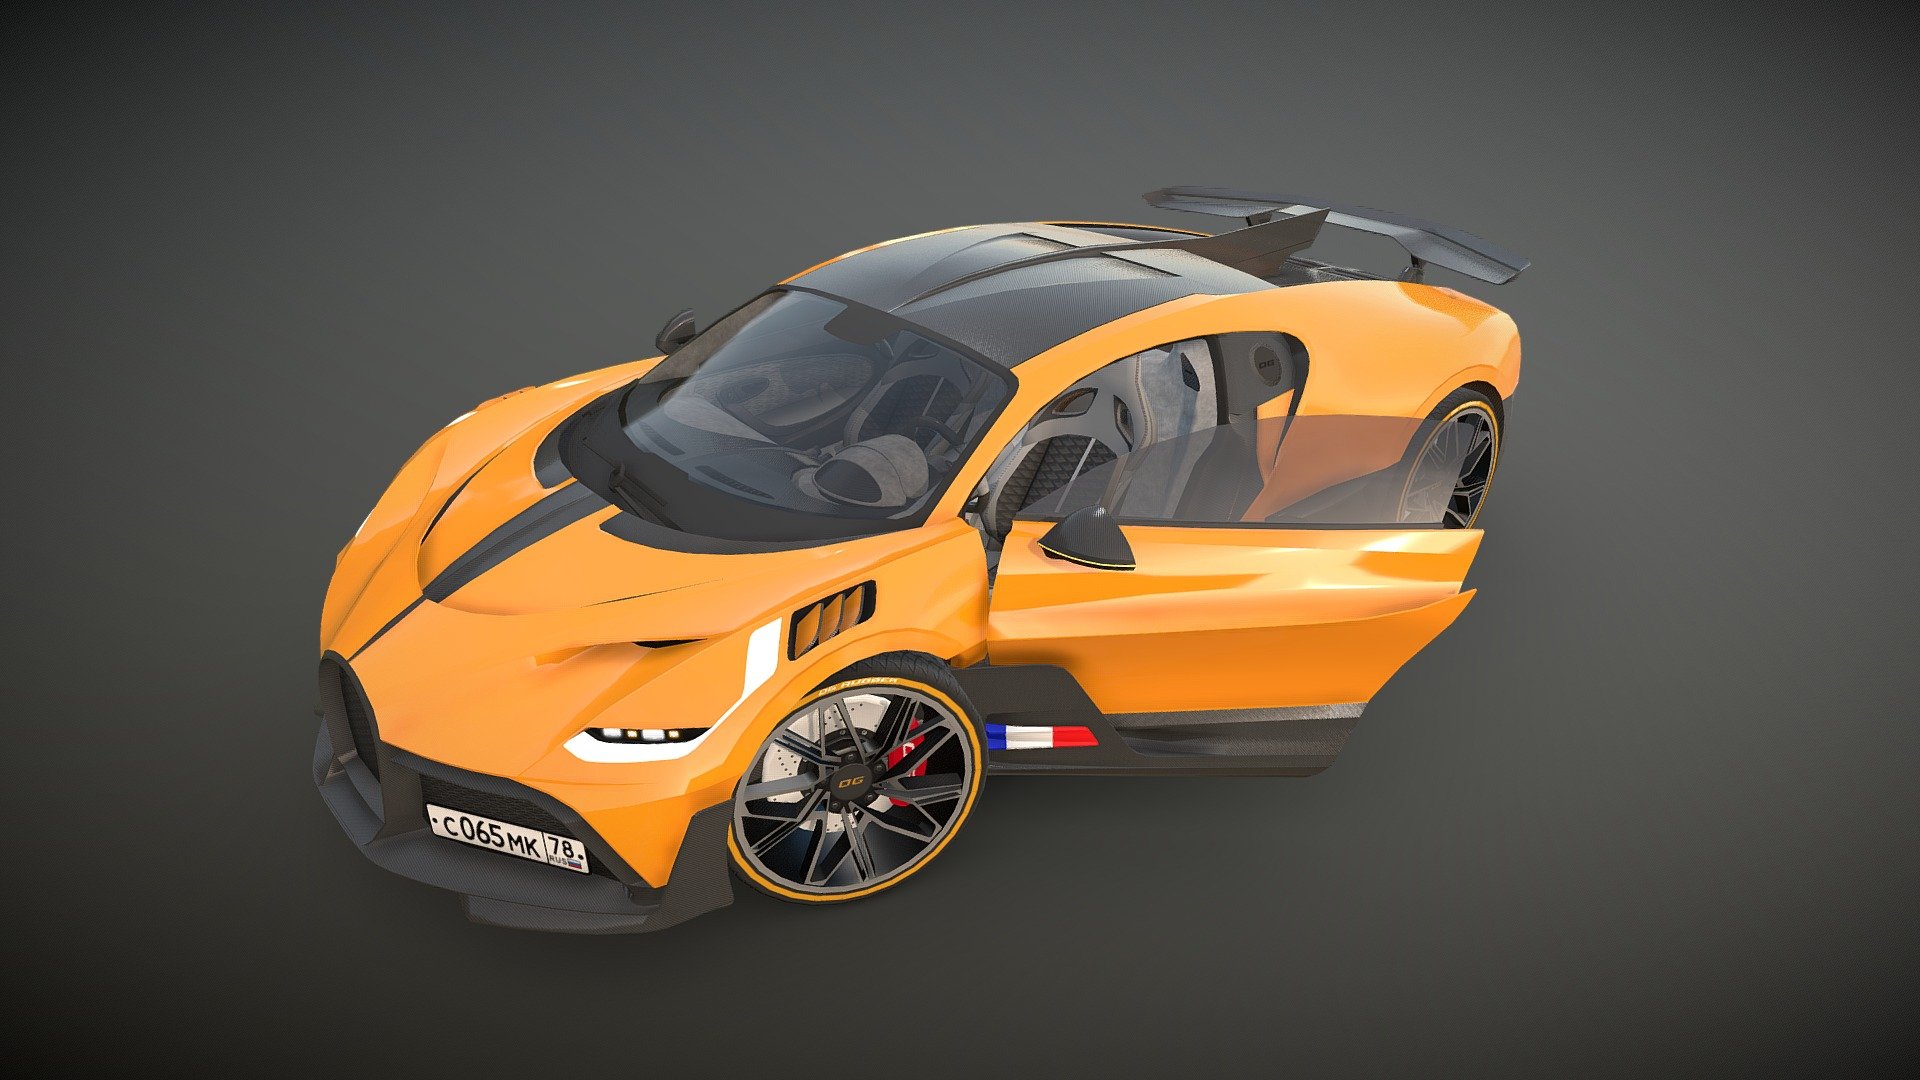 Low poly model. HQ interior. Optimized textures. Baked AO. Body - 1mat. 2048 texture. Wheels - 1mat. 512 texture - Bugatti Divo - 3D model by Главмеш (@glavmesh) 3d model